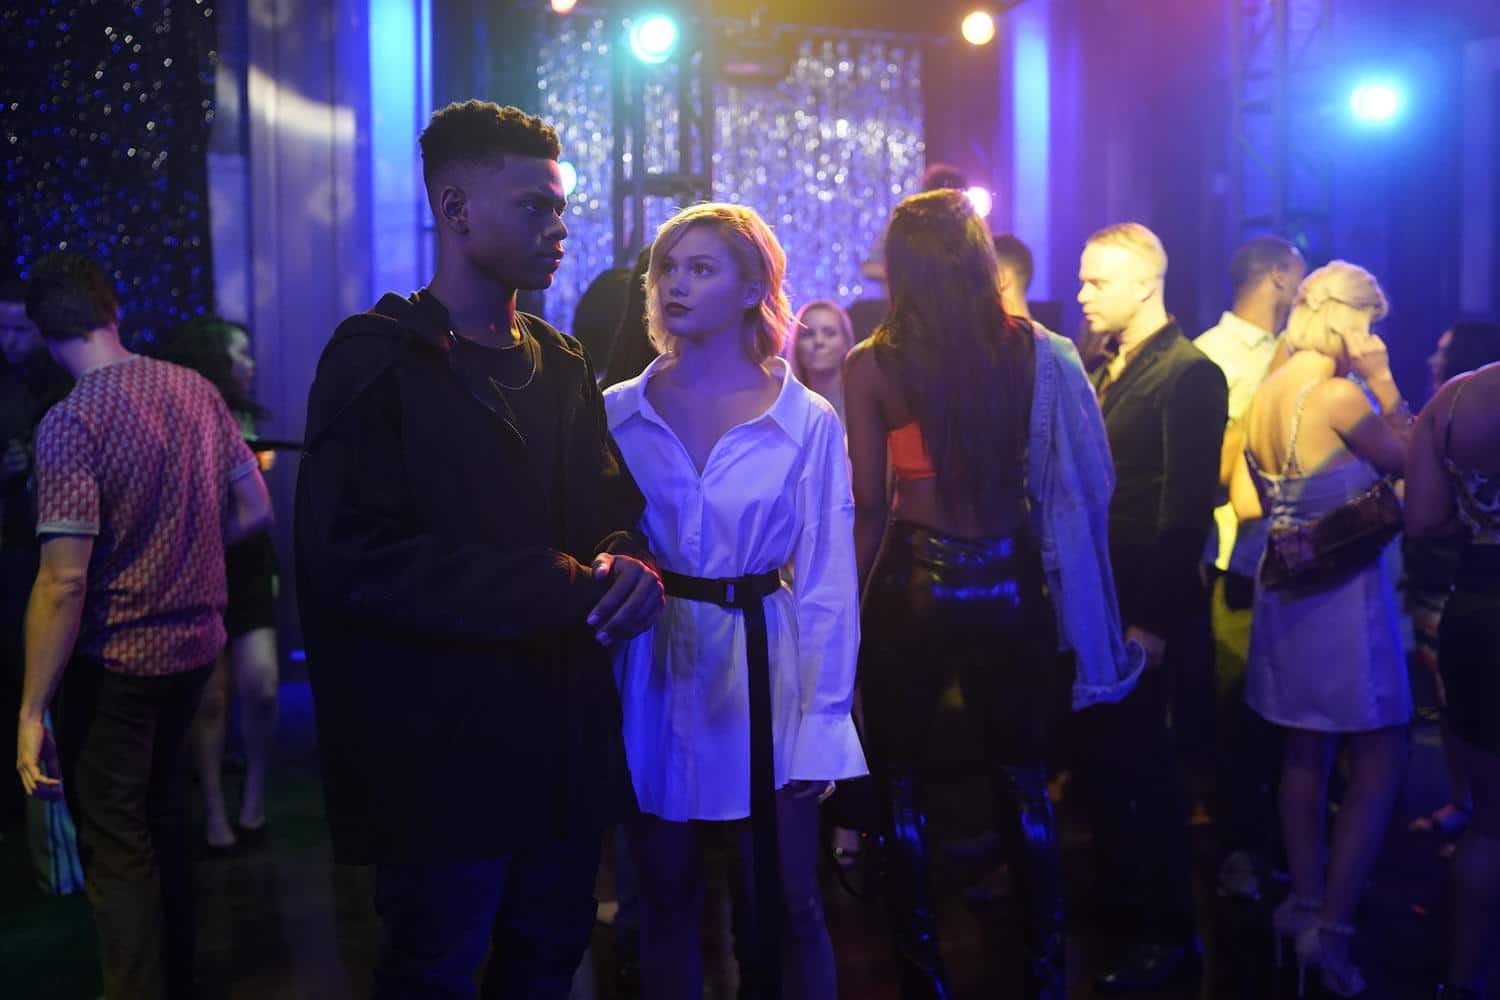 Cloak and Dagger Season 2: Some Story Details and 4 New Images